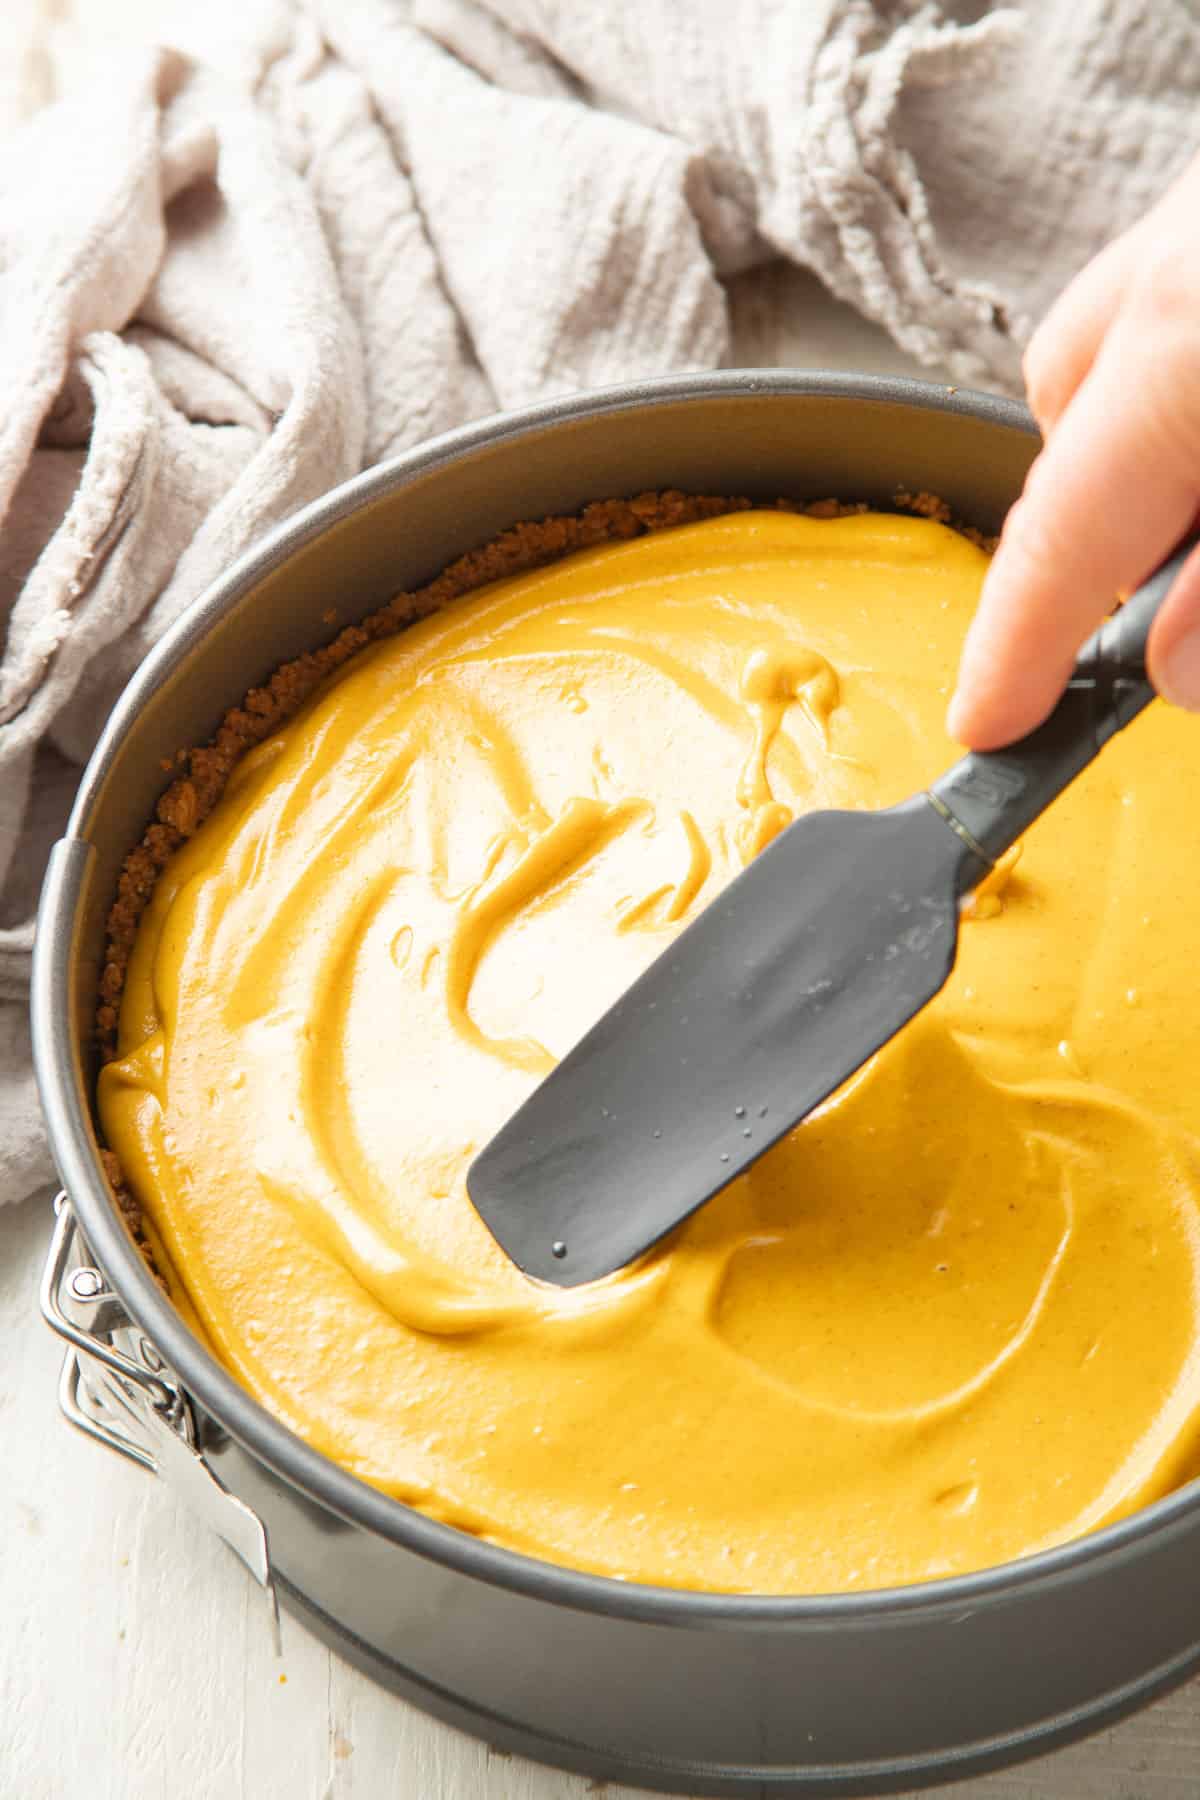 Hand with spatula smoothing Vegan Pumpkin Cheesecake batter in a pan.